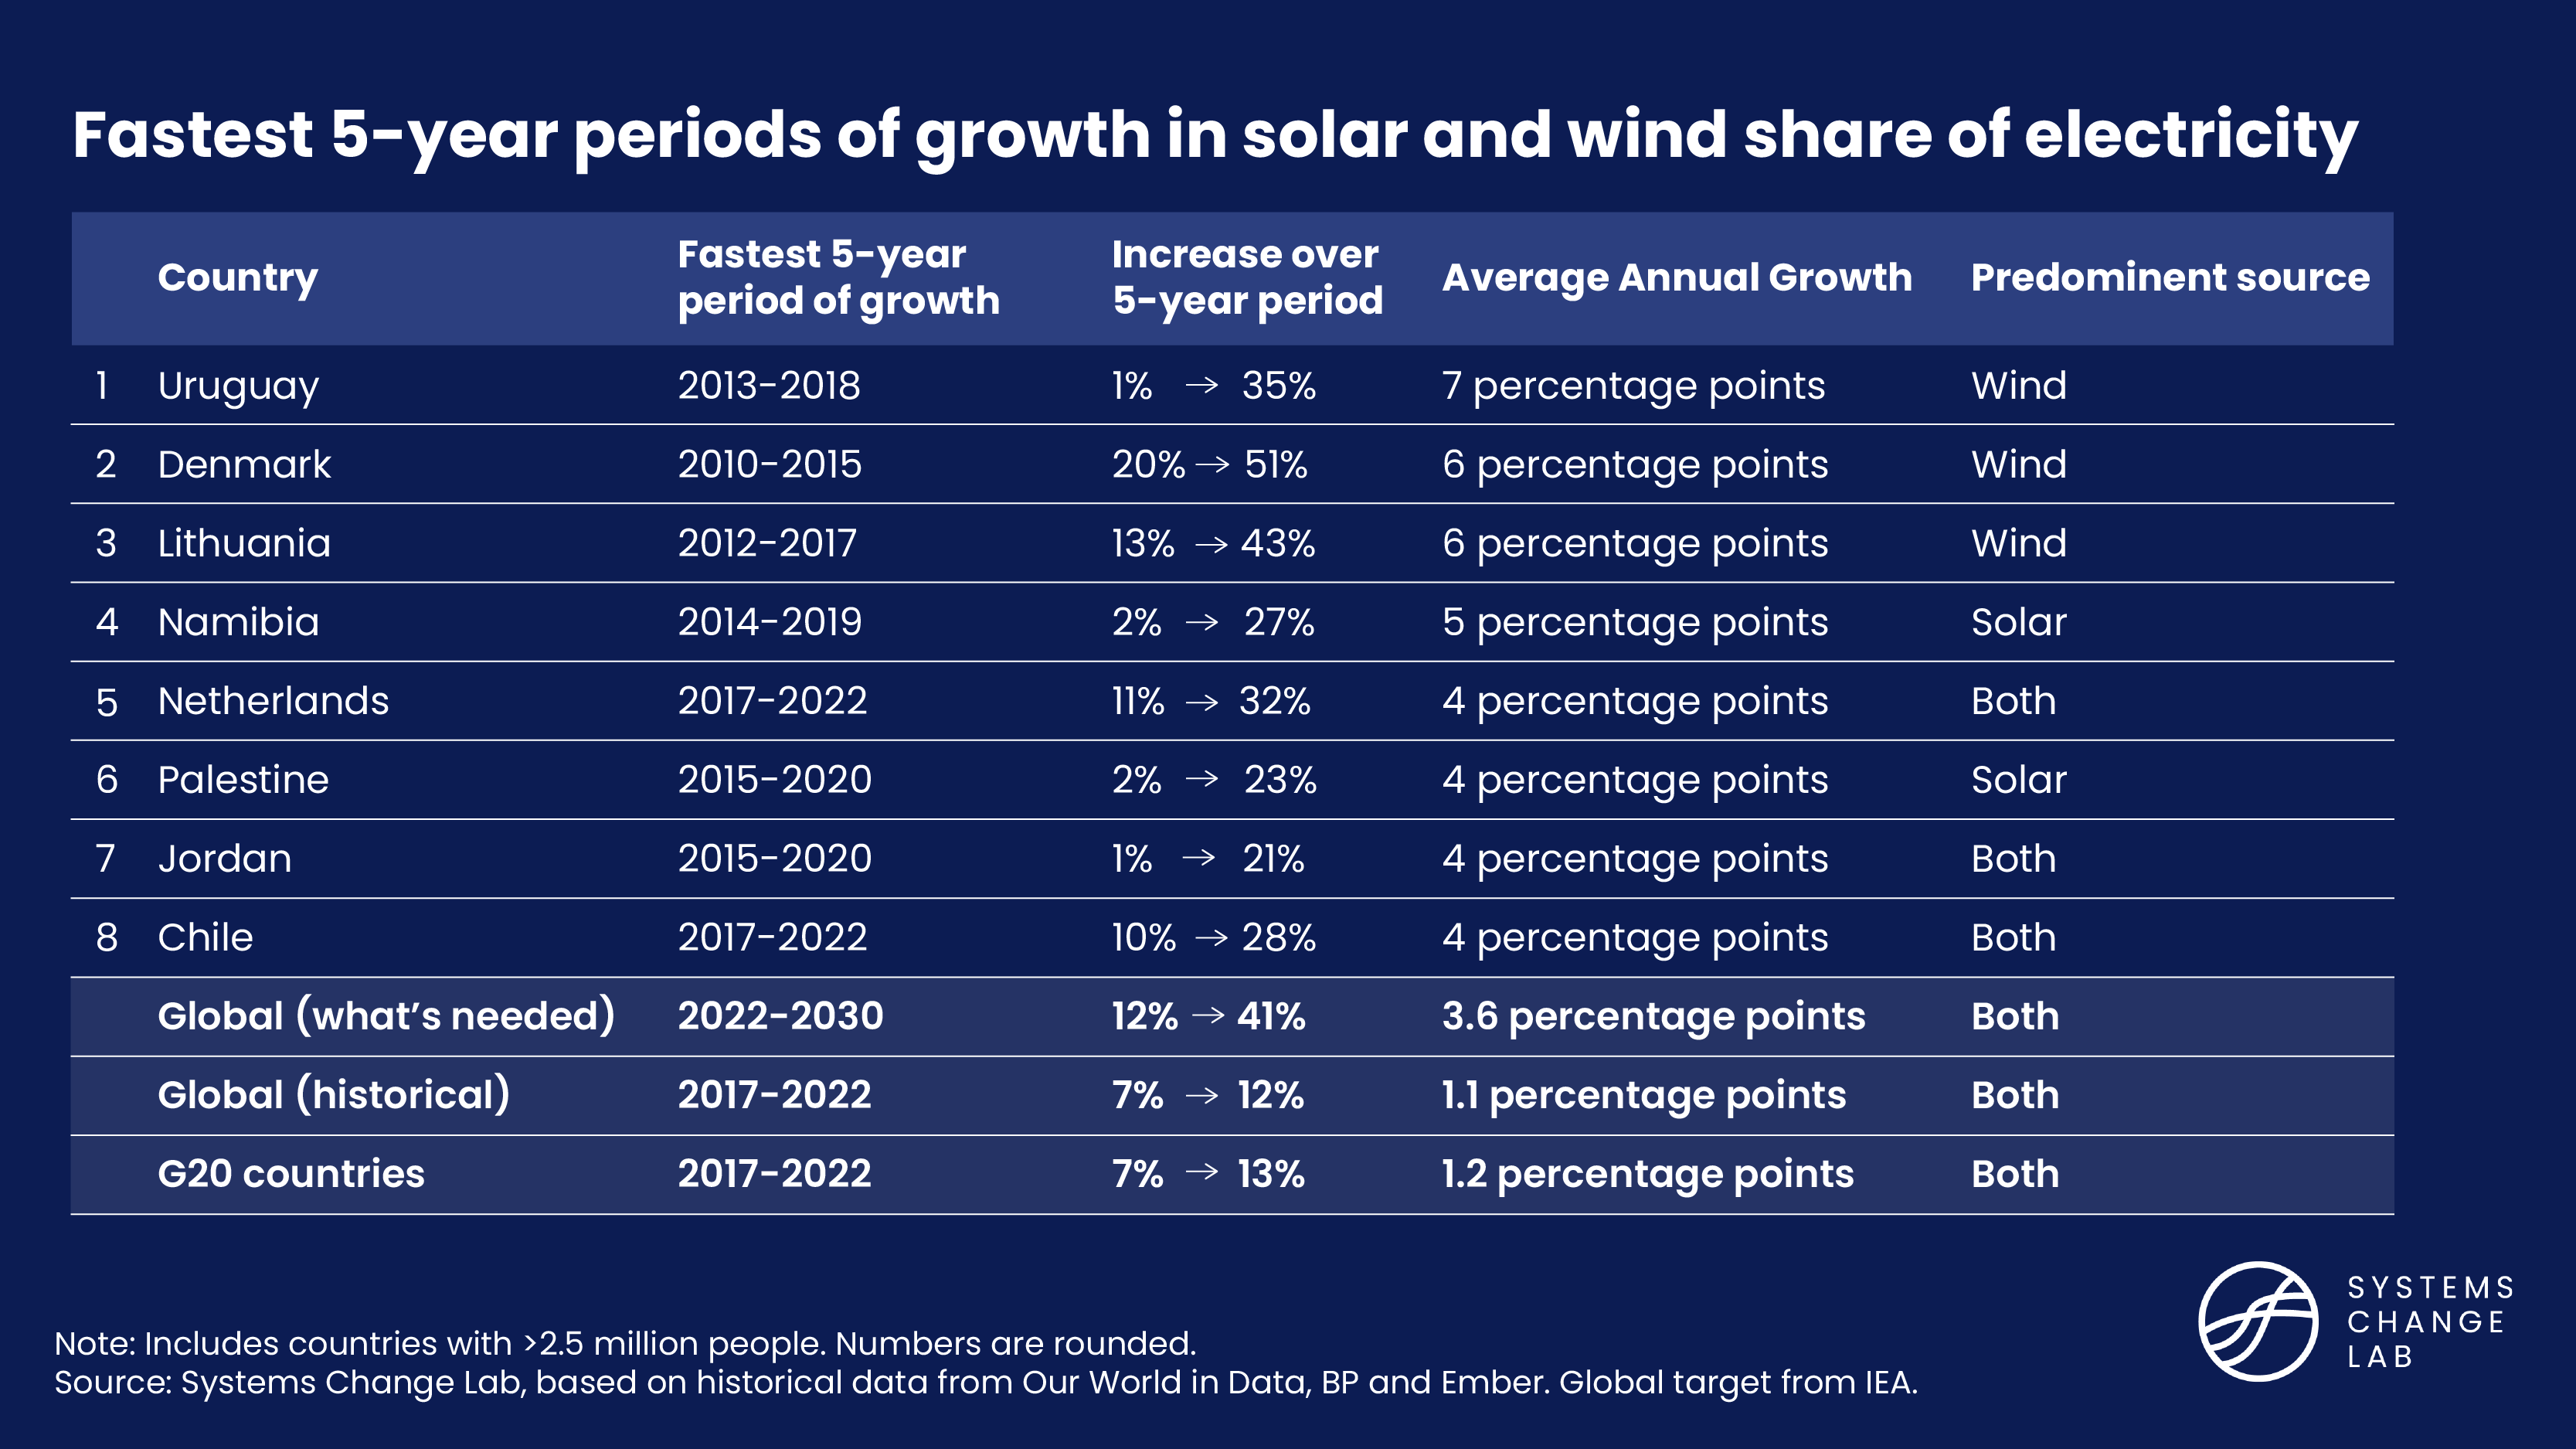 Fastest 5-year periods of growth in solar and wind share of electricity